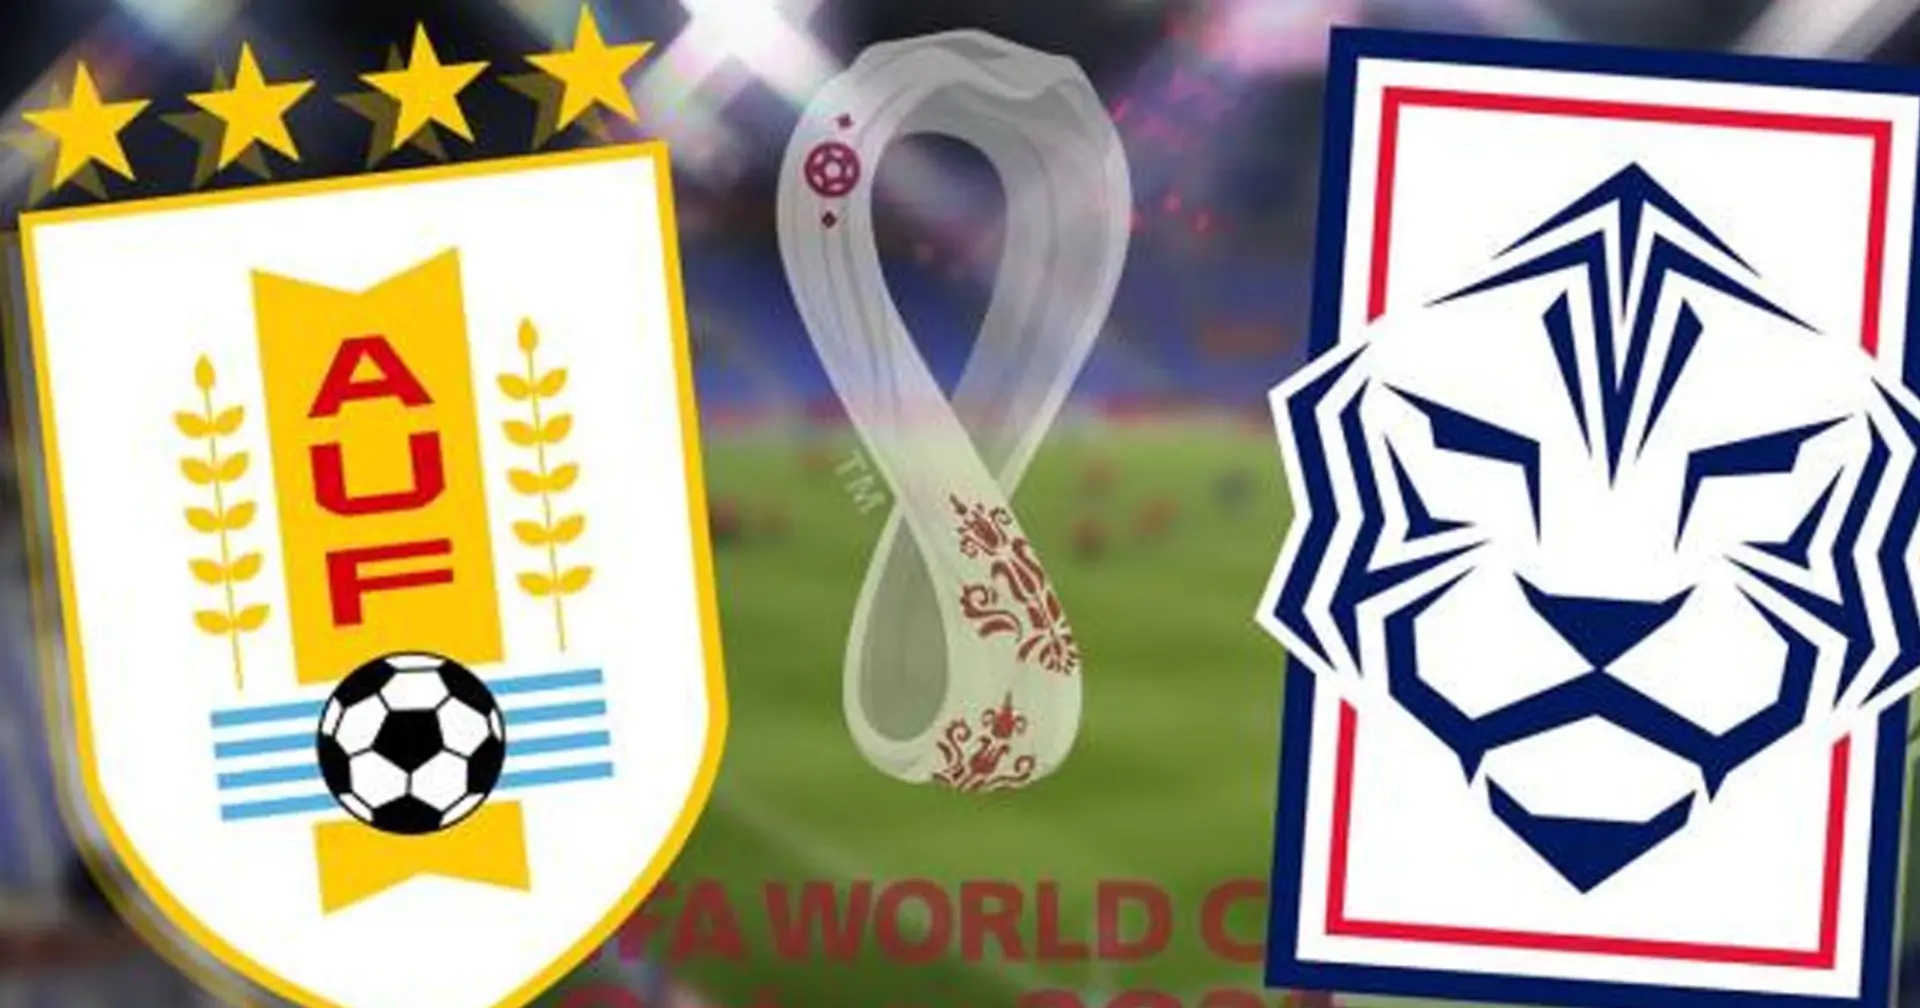 Uruguay vs South Korea: Official team lineups for the World Cup clash revealed